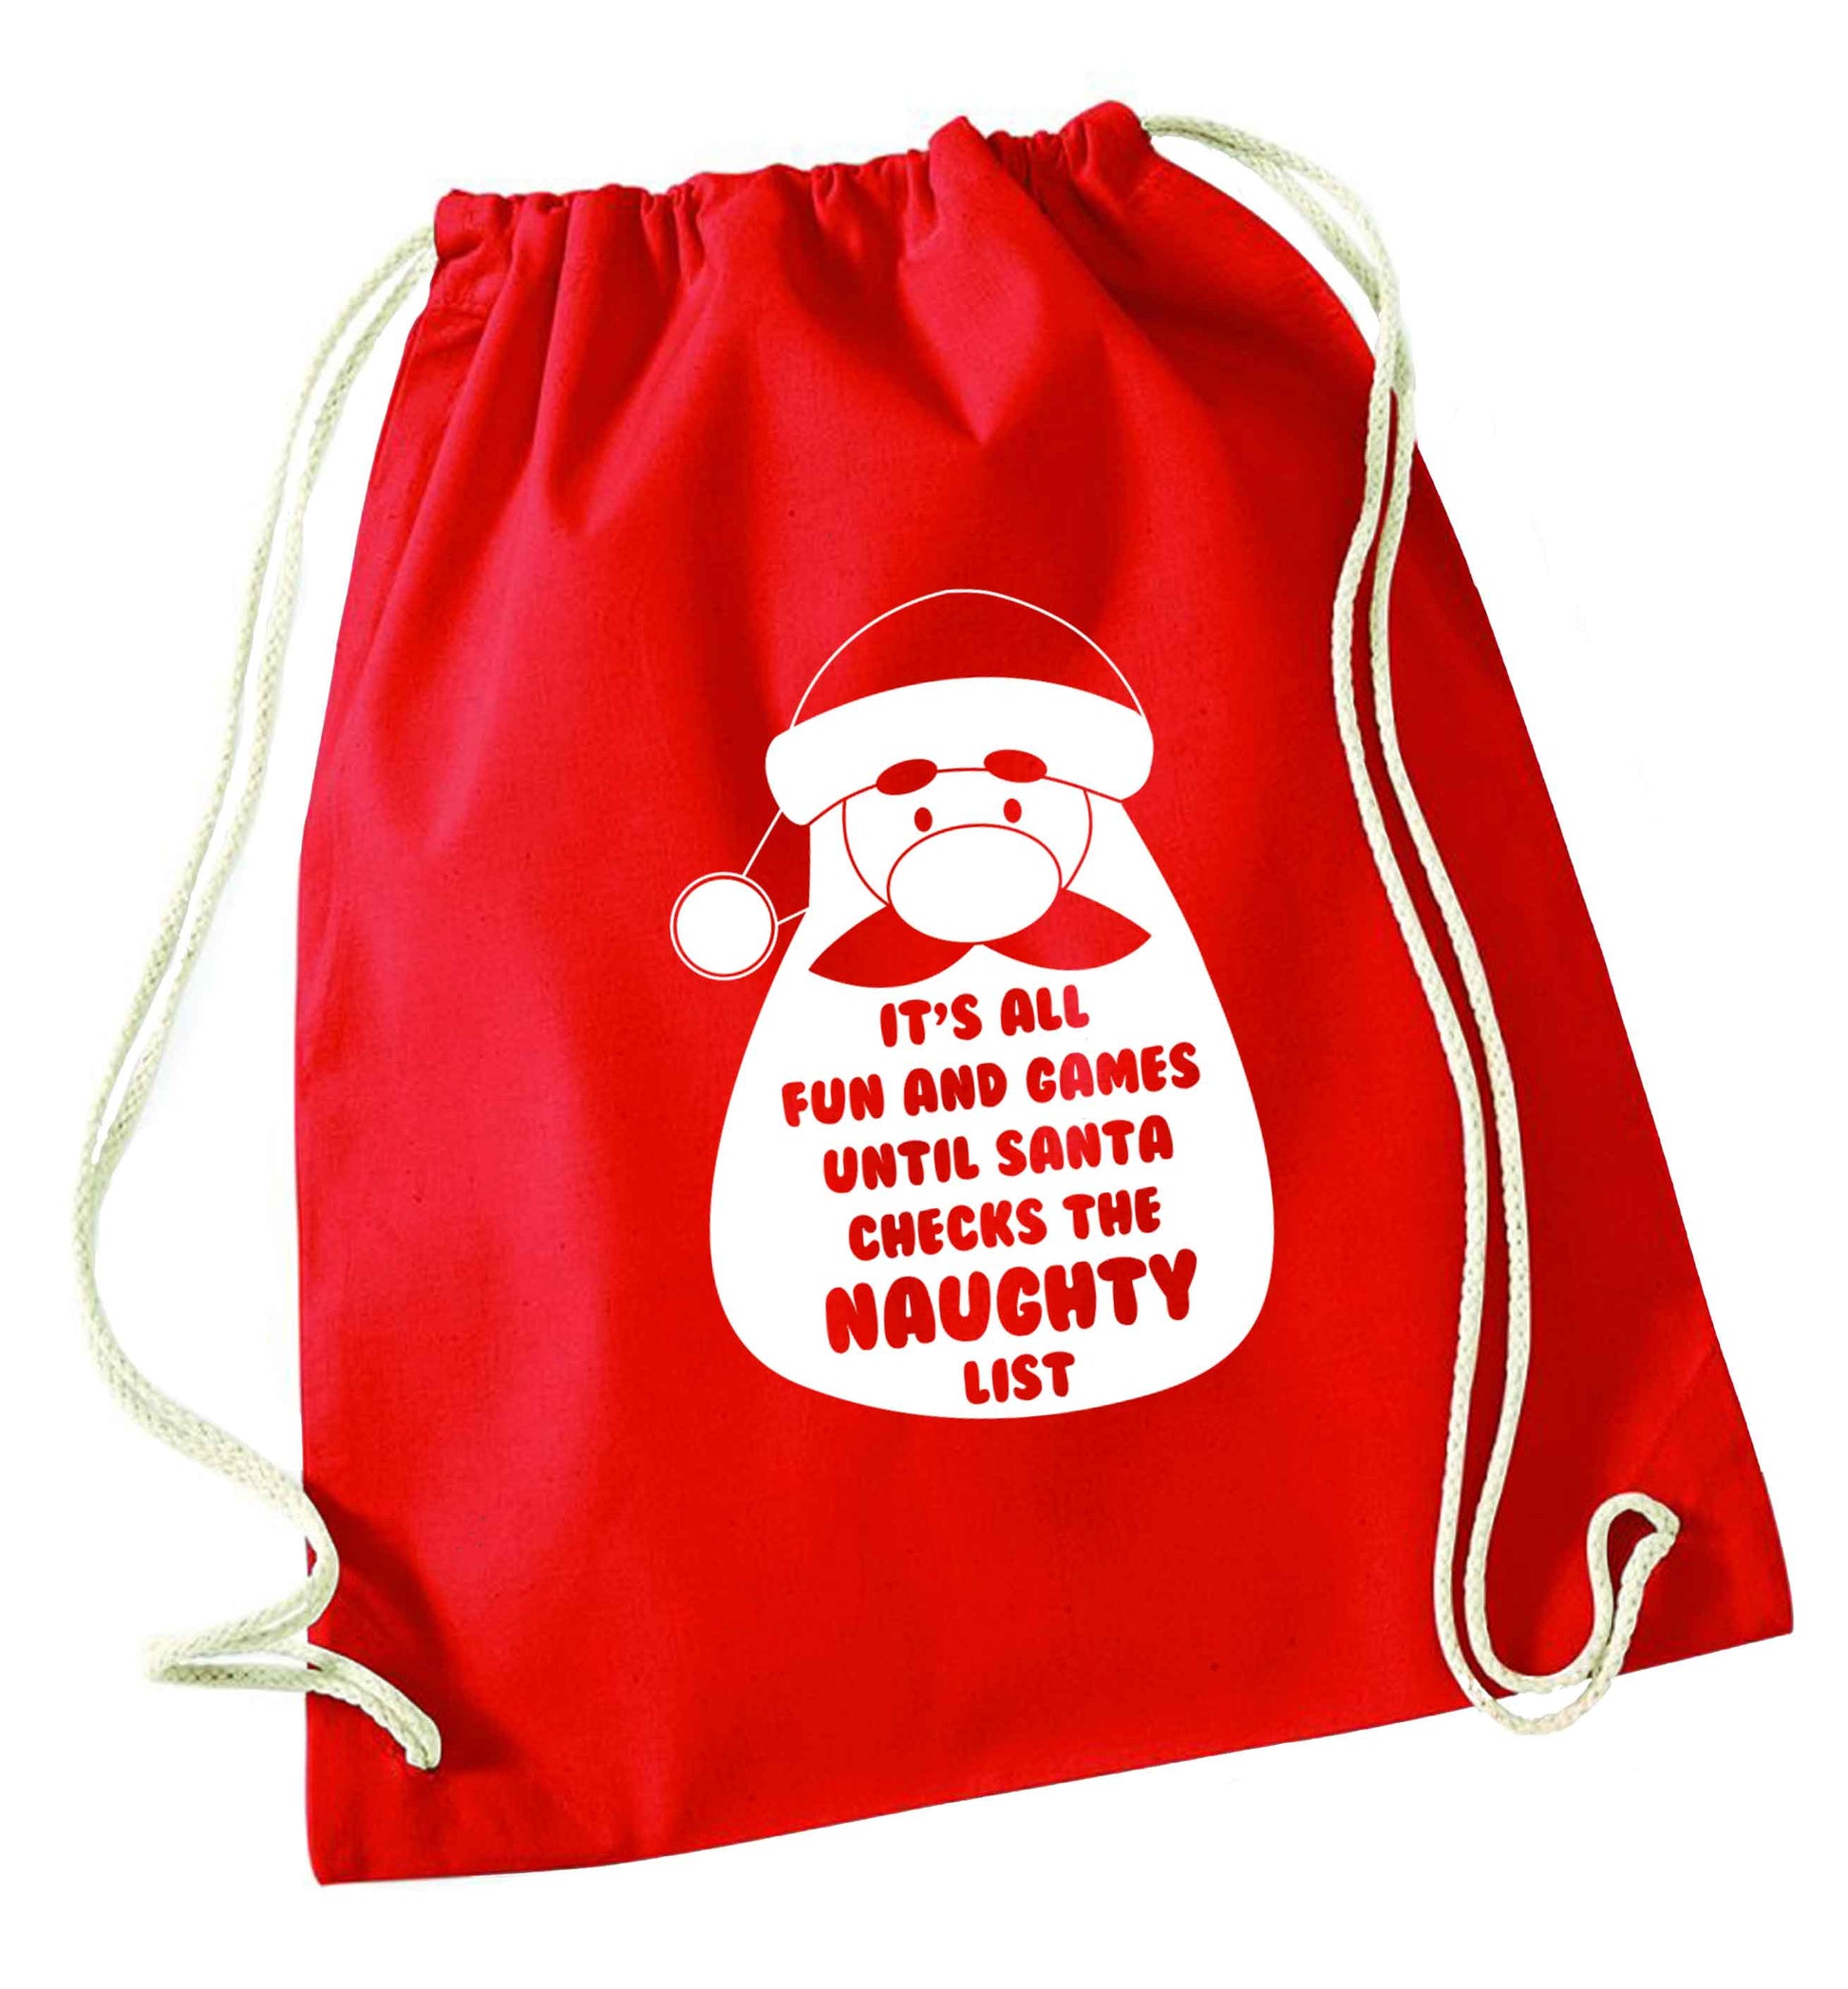 It's all fun and games until Santa checks the naughty list red drawstring bag 